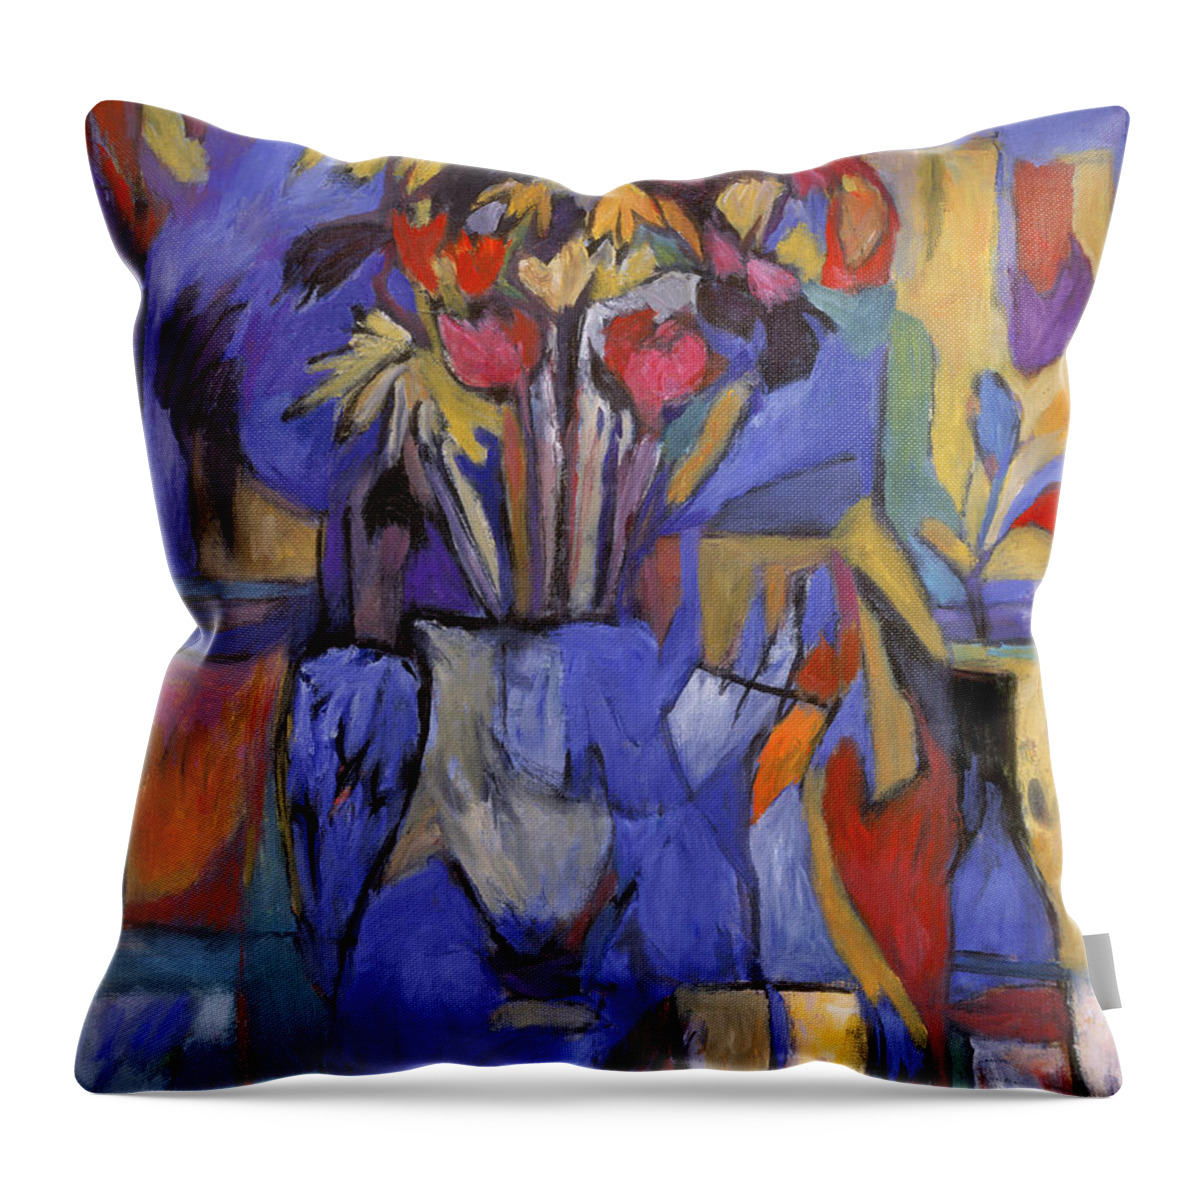 Oil Throw Pillow featuring the painting Cobalt Rose by Mykul Anjelo